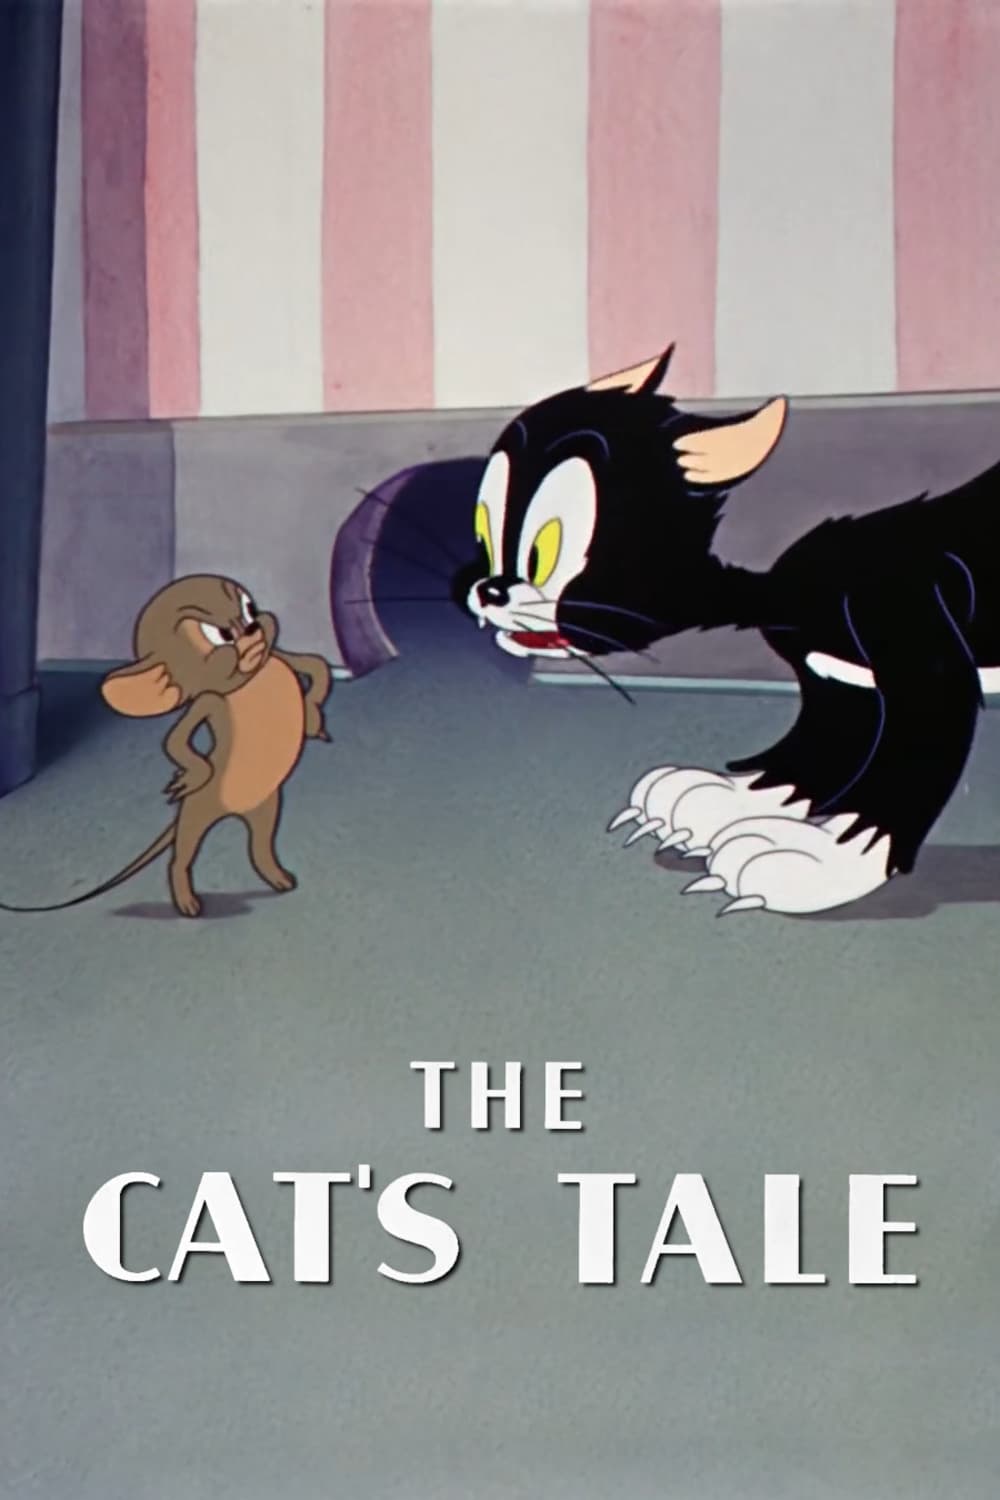 The Cat's Tale (1941)